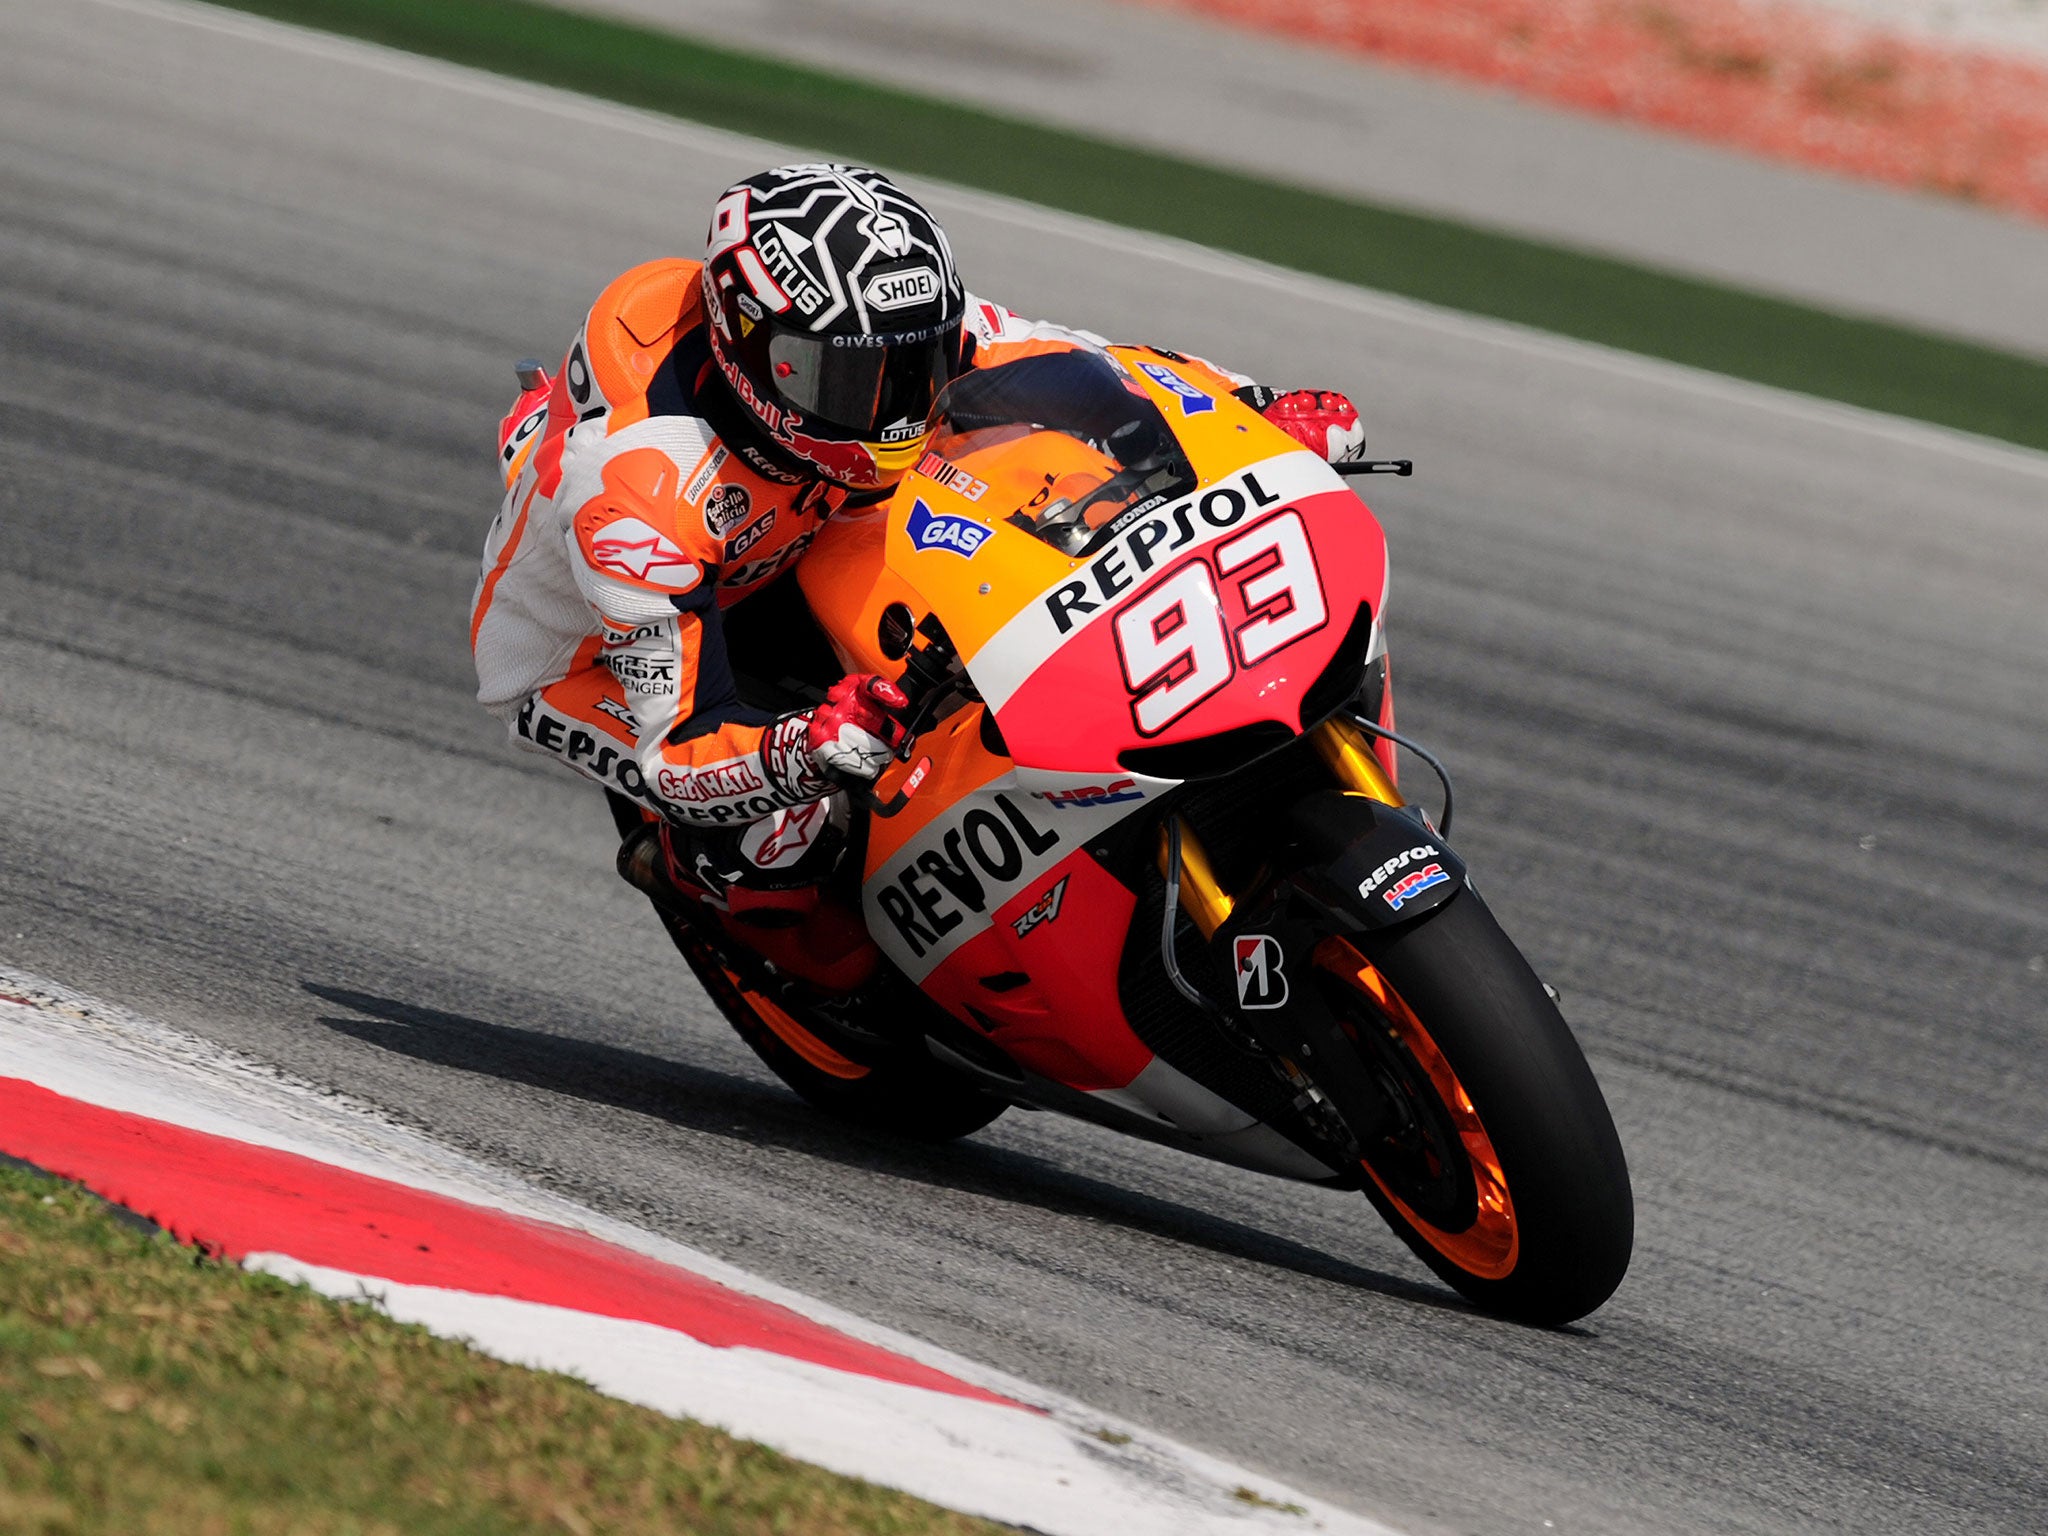 Marc Marquez set the fastest time over the three-day test